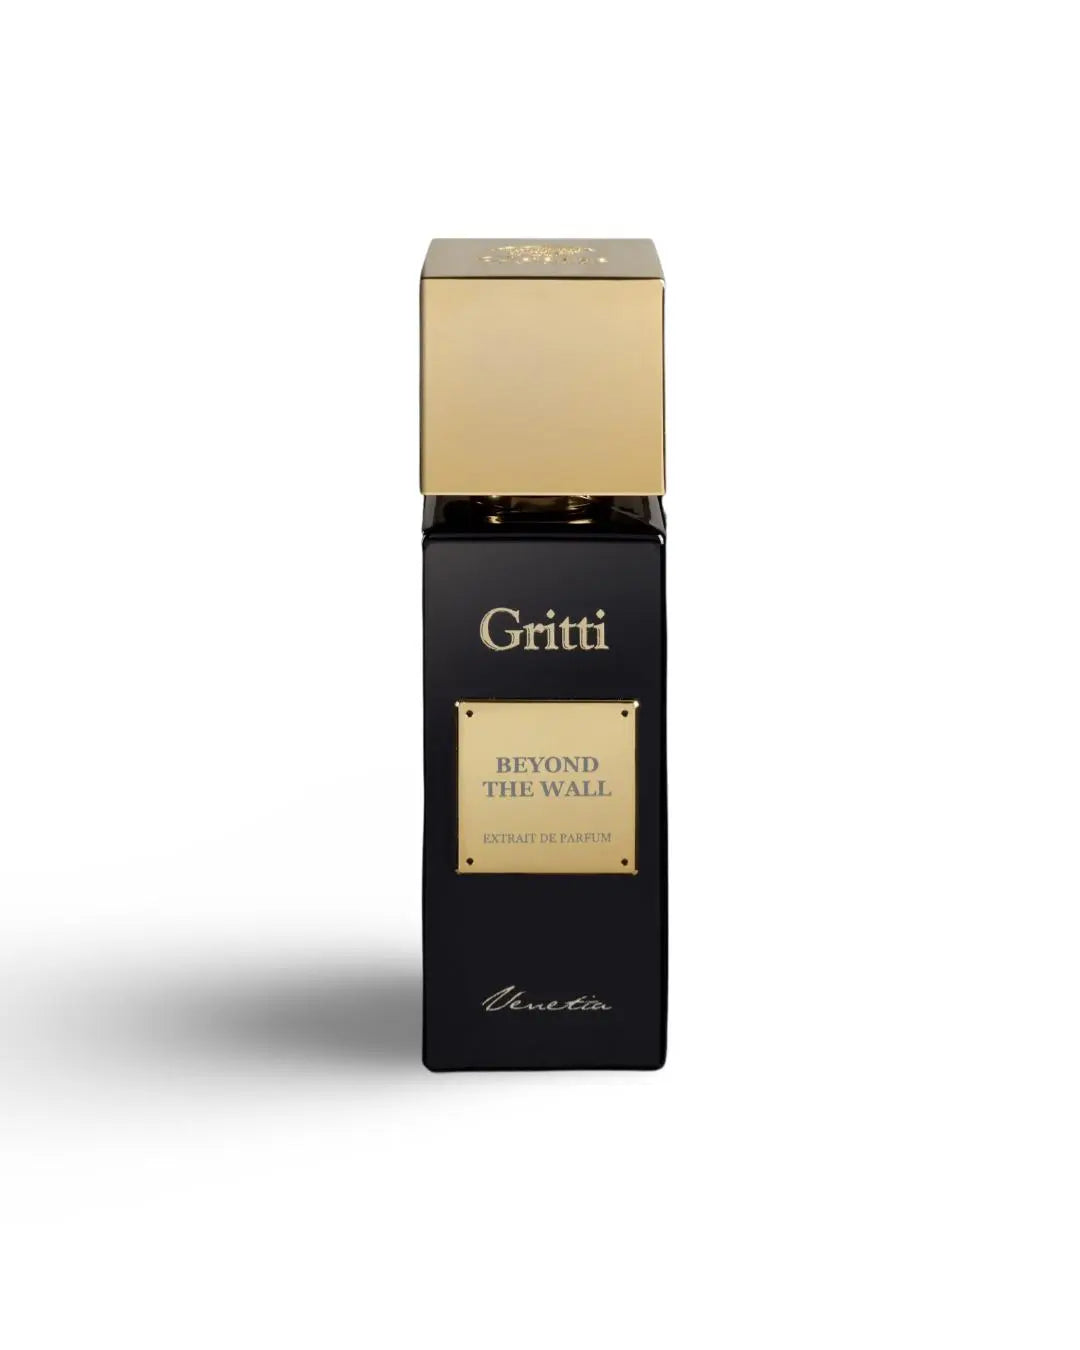 Beyond The Wall Gritti Perfume Extract 100ml